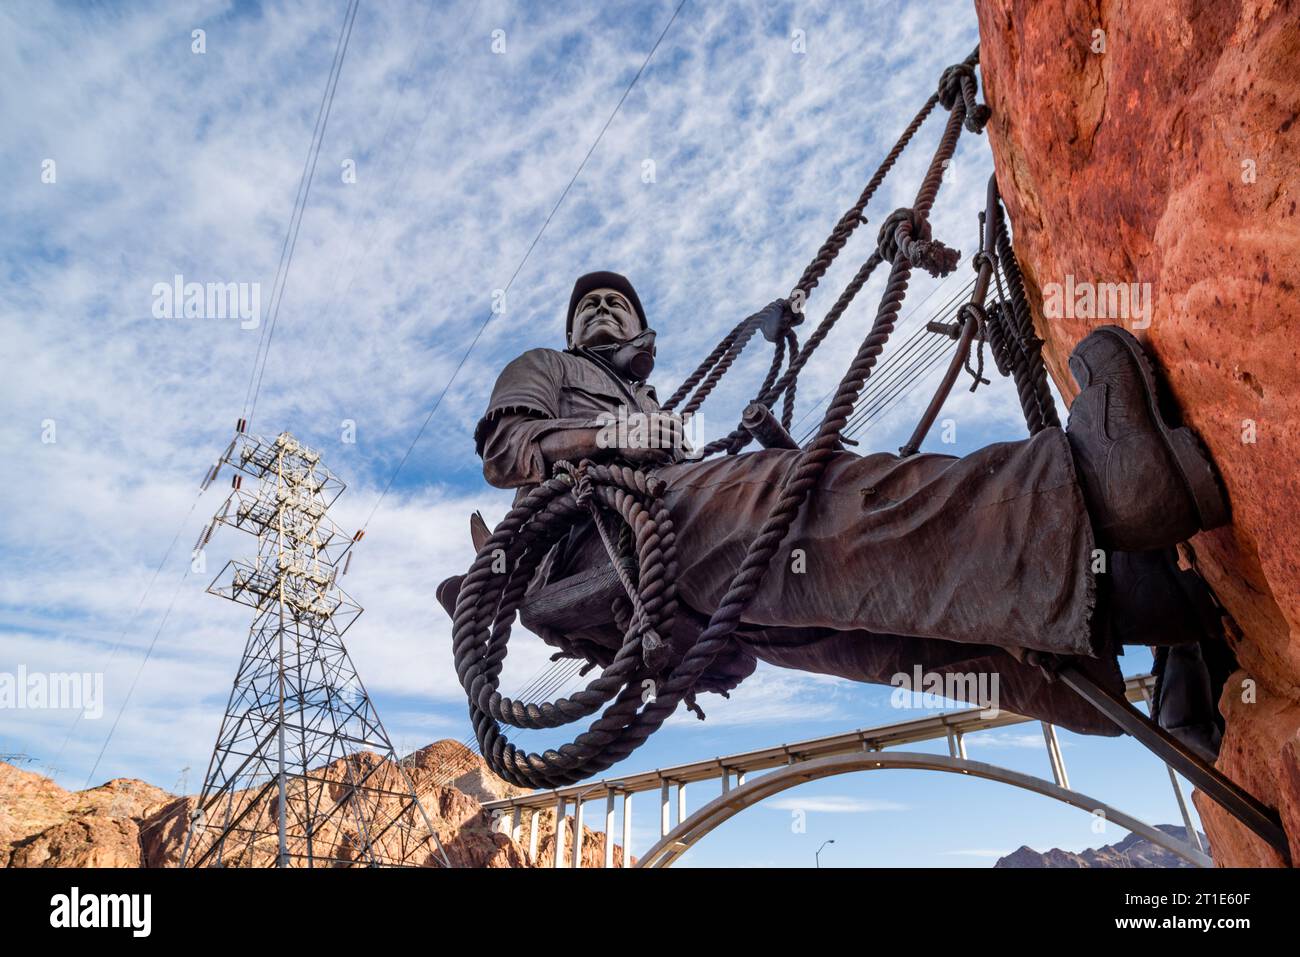 Statue of the labourers that helped build the Hoover Dam power plant. Stock Photo